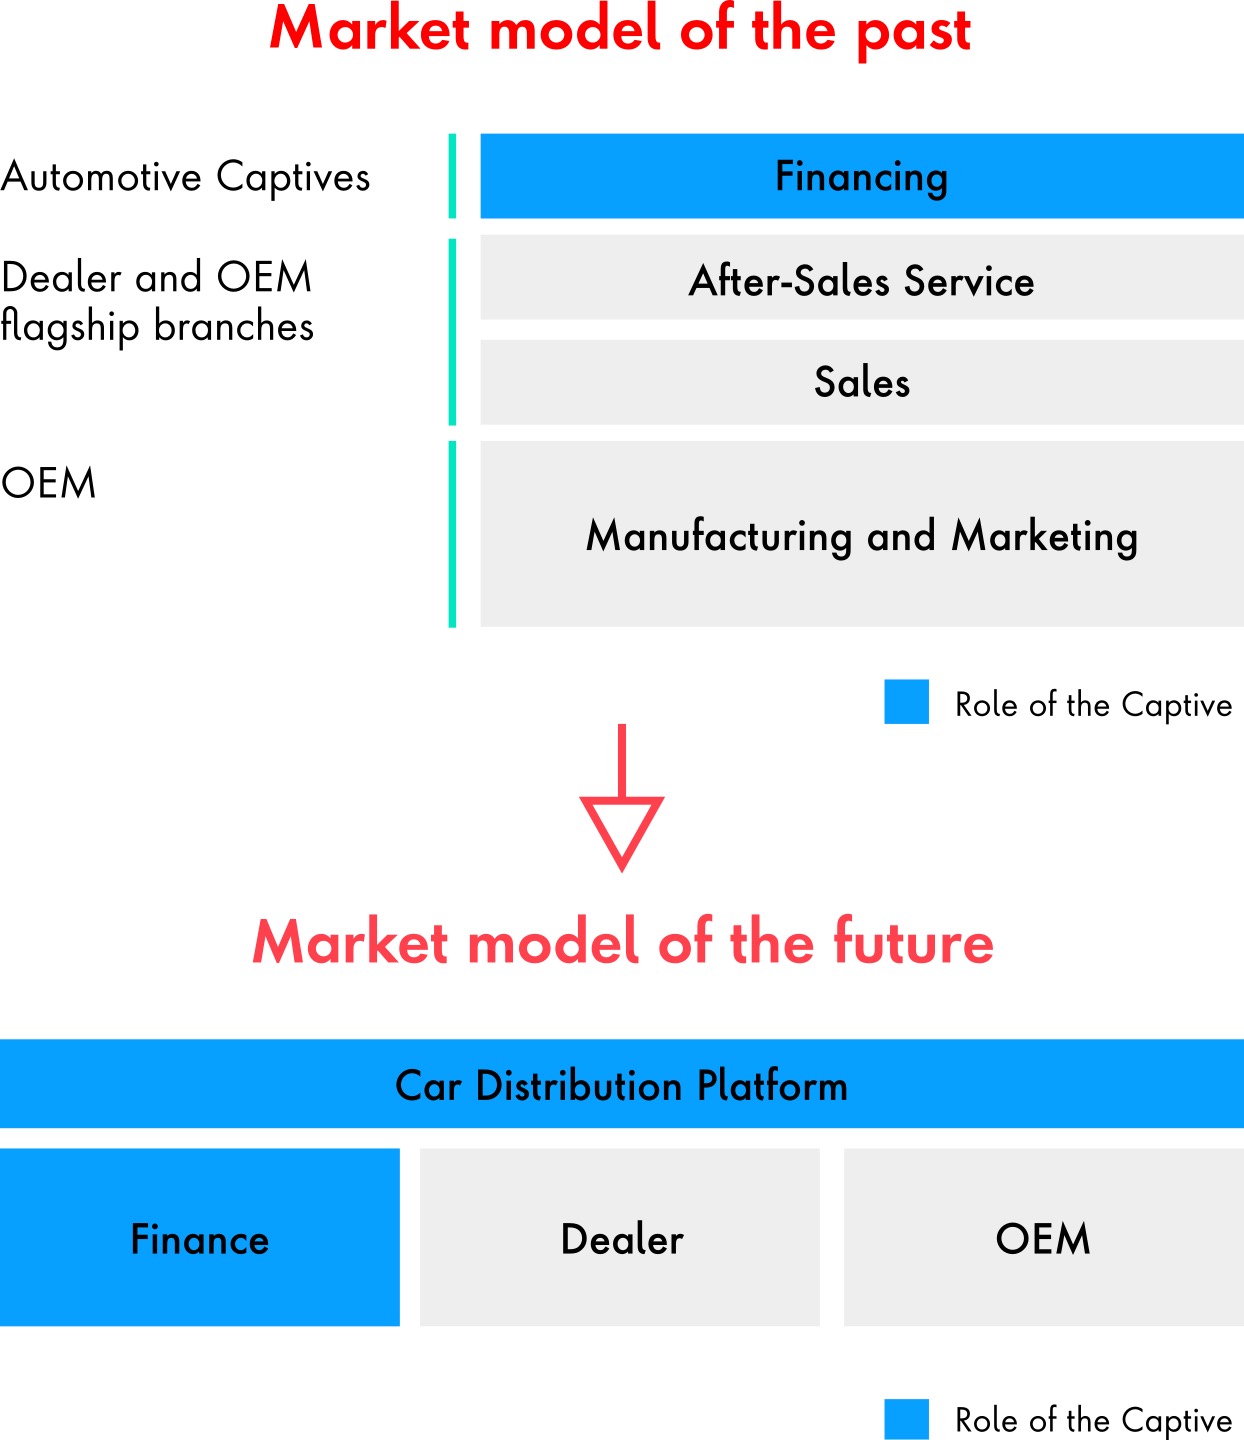 Graphic chart illustrating the evolving role of captive lending, as it becomes central to the automotive ecosystem. Over time, we are seeing captives harness data, customer engagement platforms and new sales models to connect buyers to inventory, service bundling and financing opt